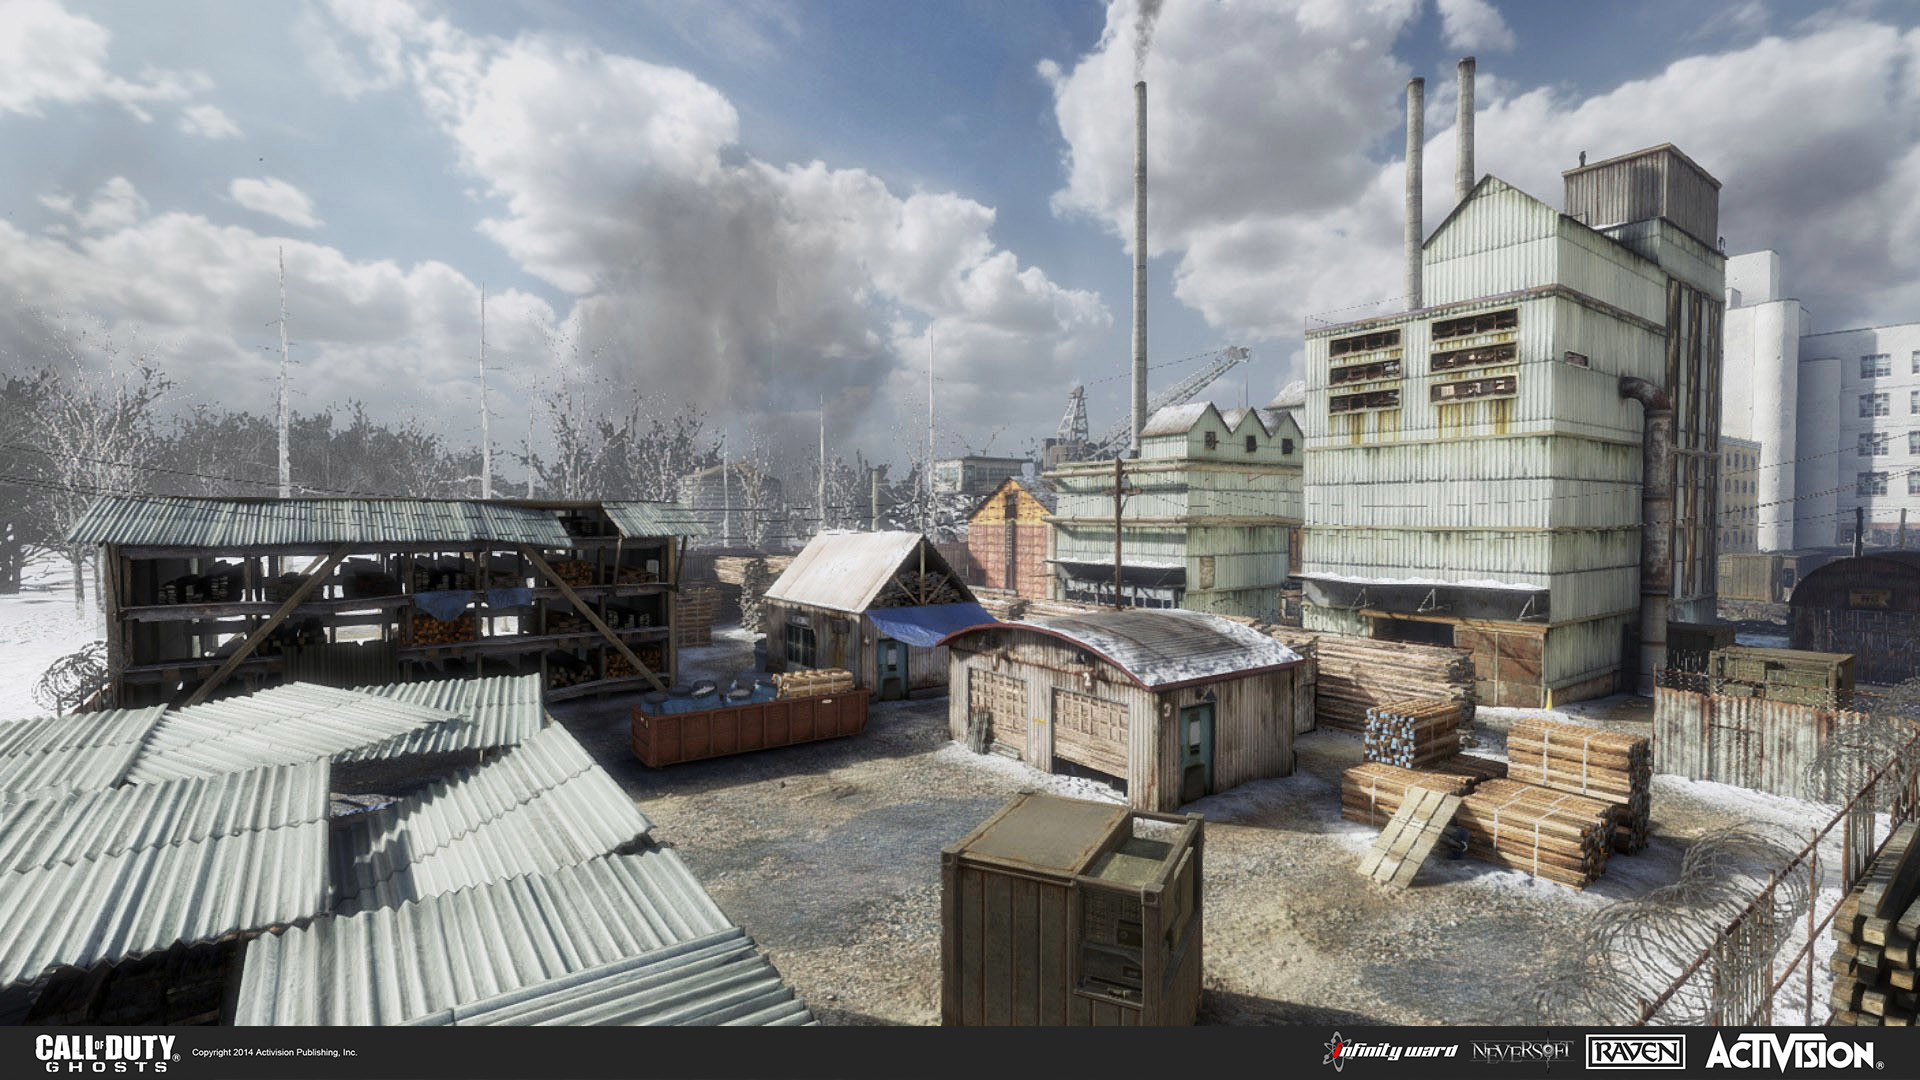 Will Petrosky - Call of Duty: Ghosts Multiplayer Map - Octane